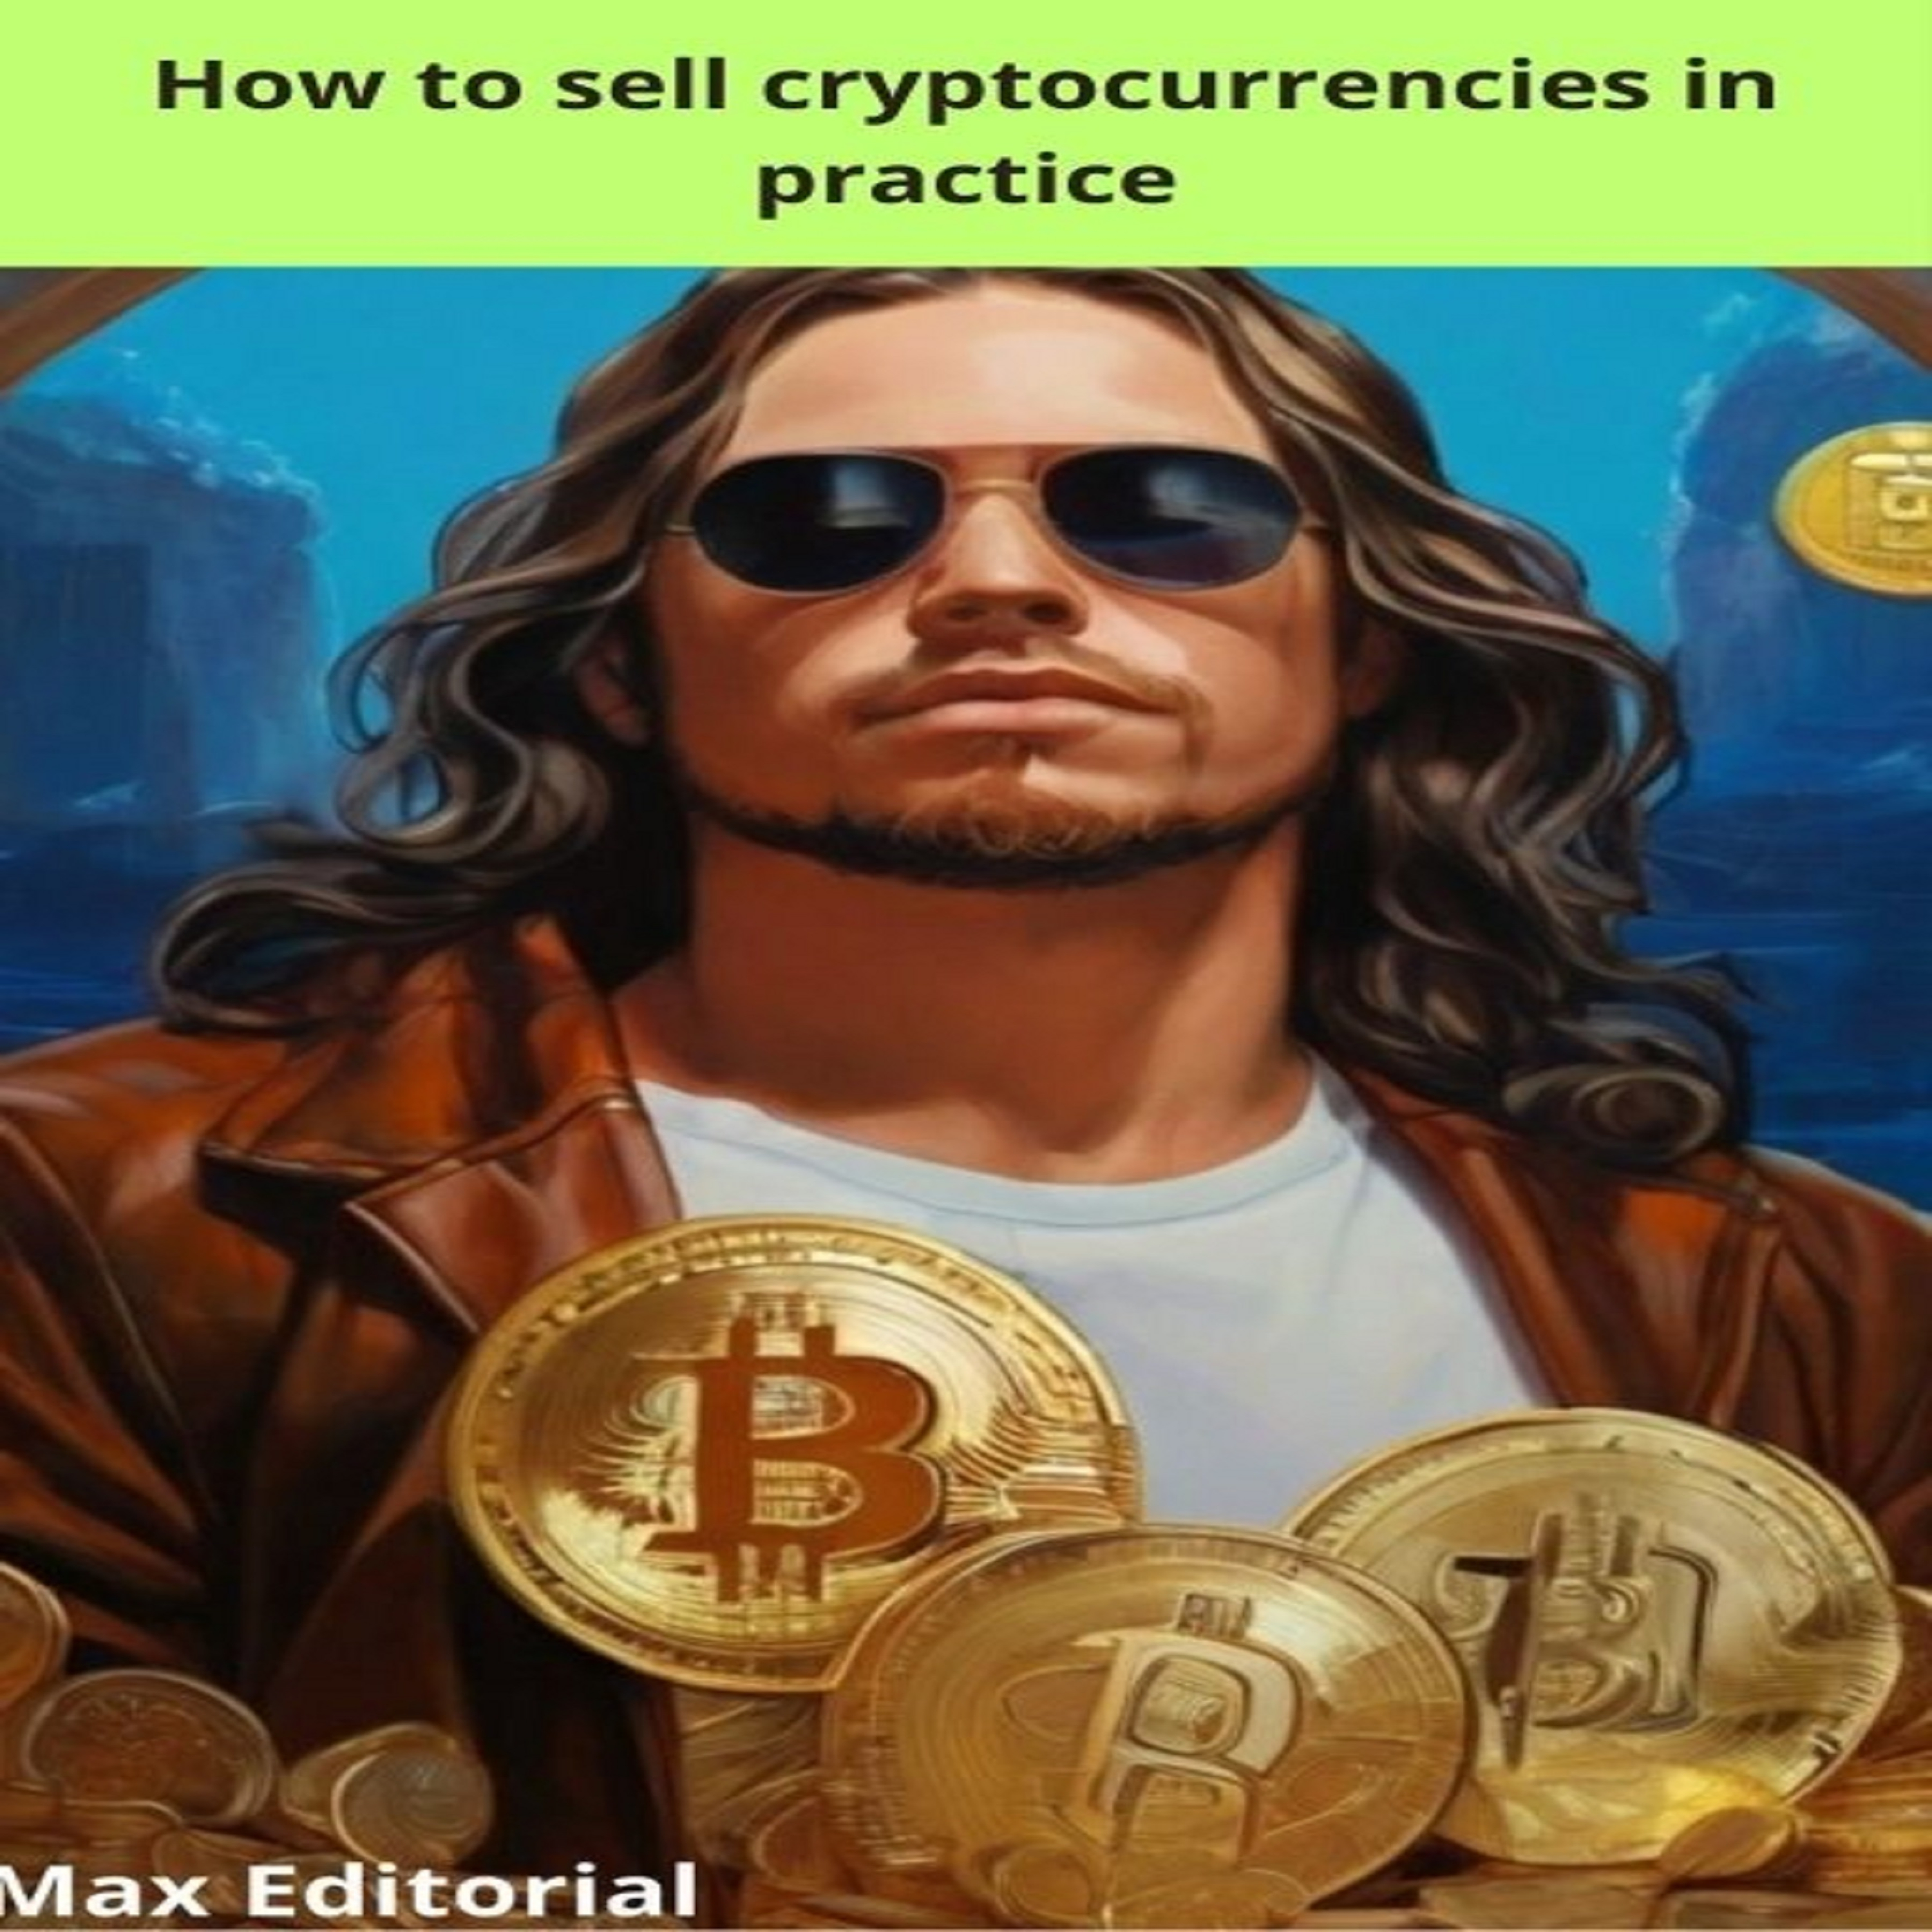 How to sell cryptocurrencies in practice